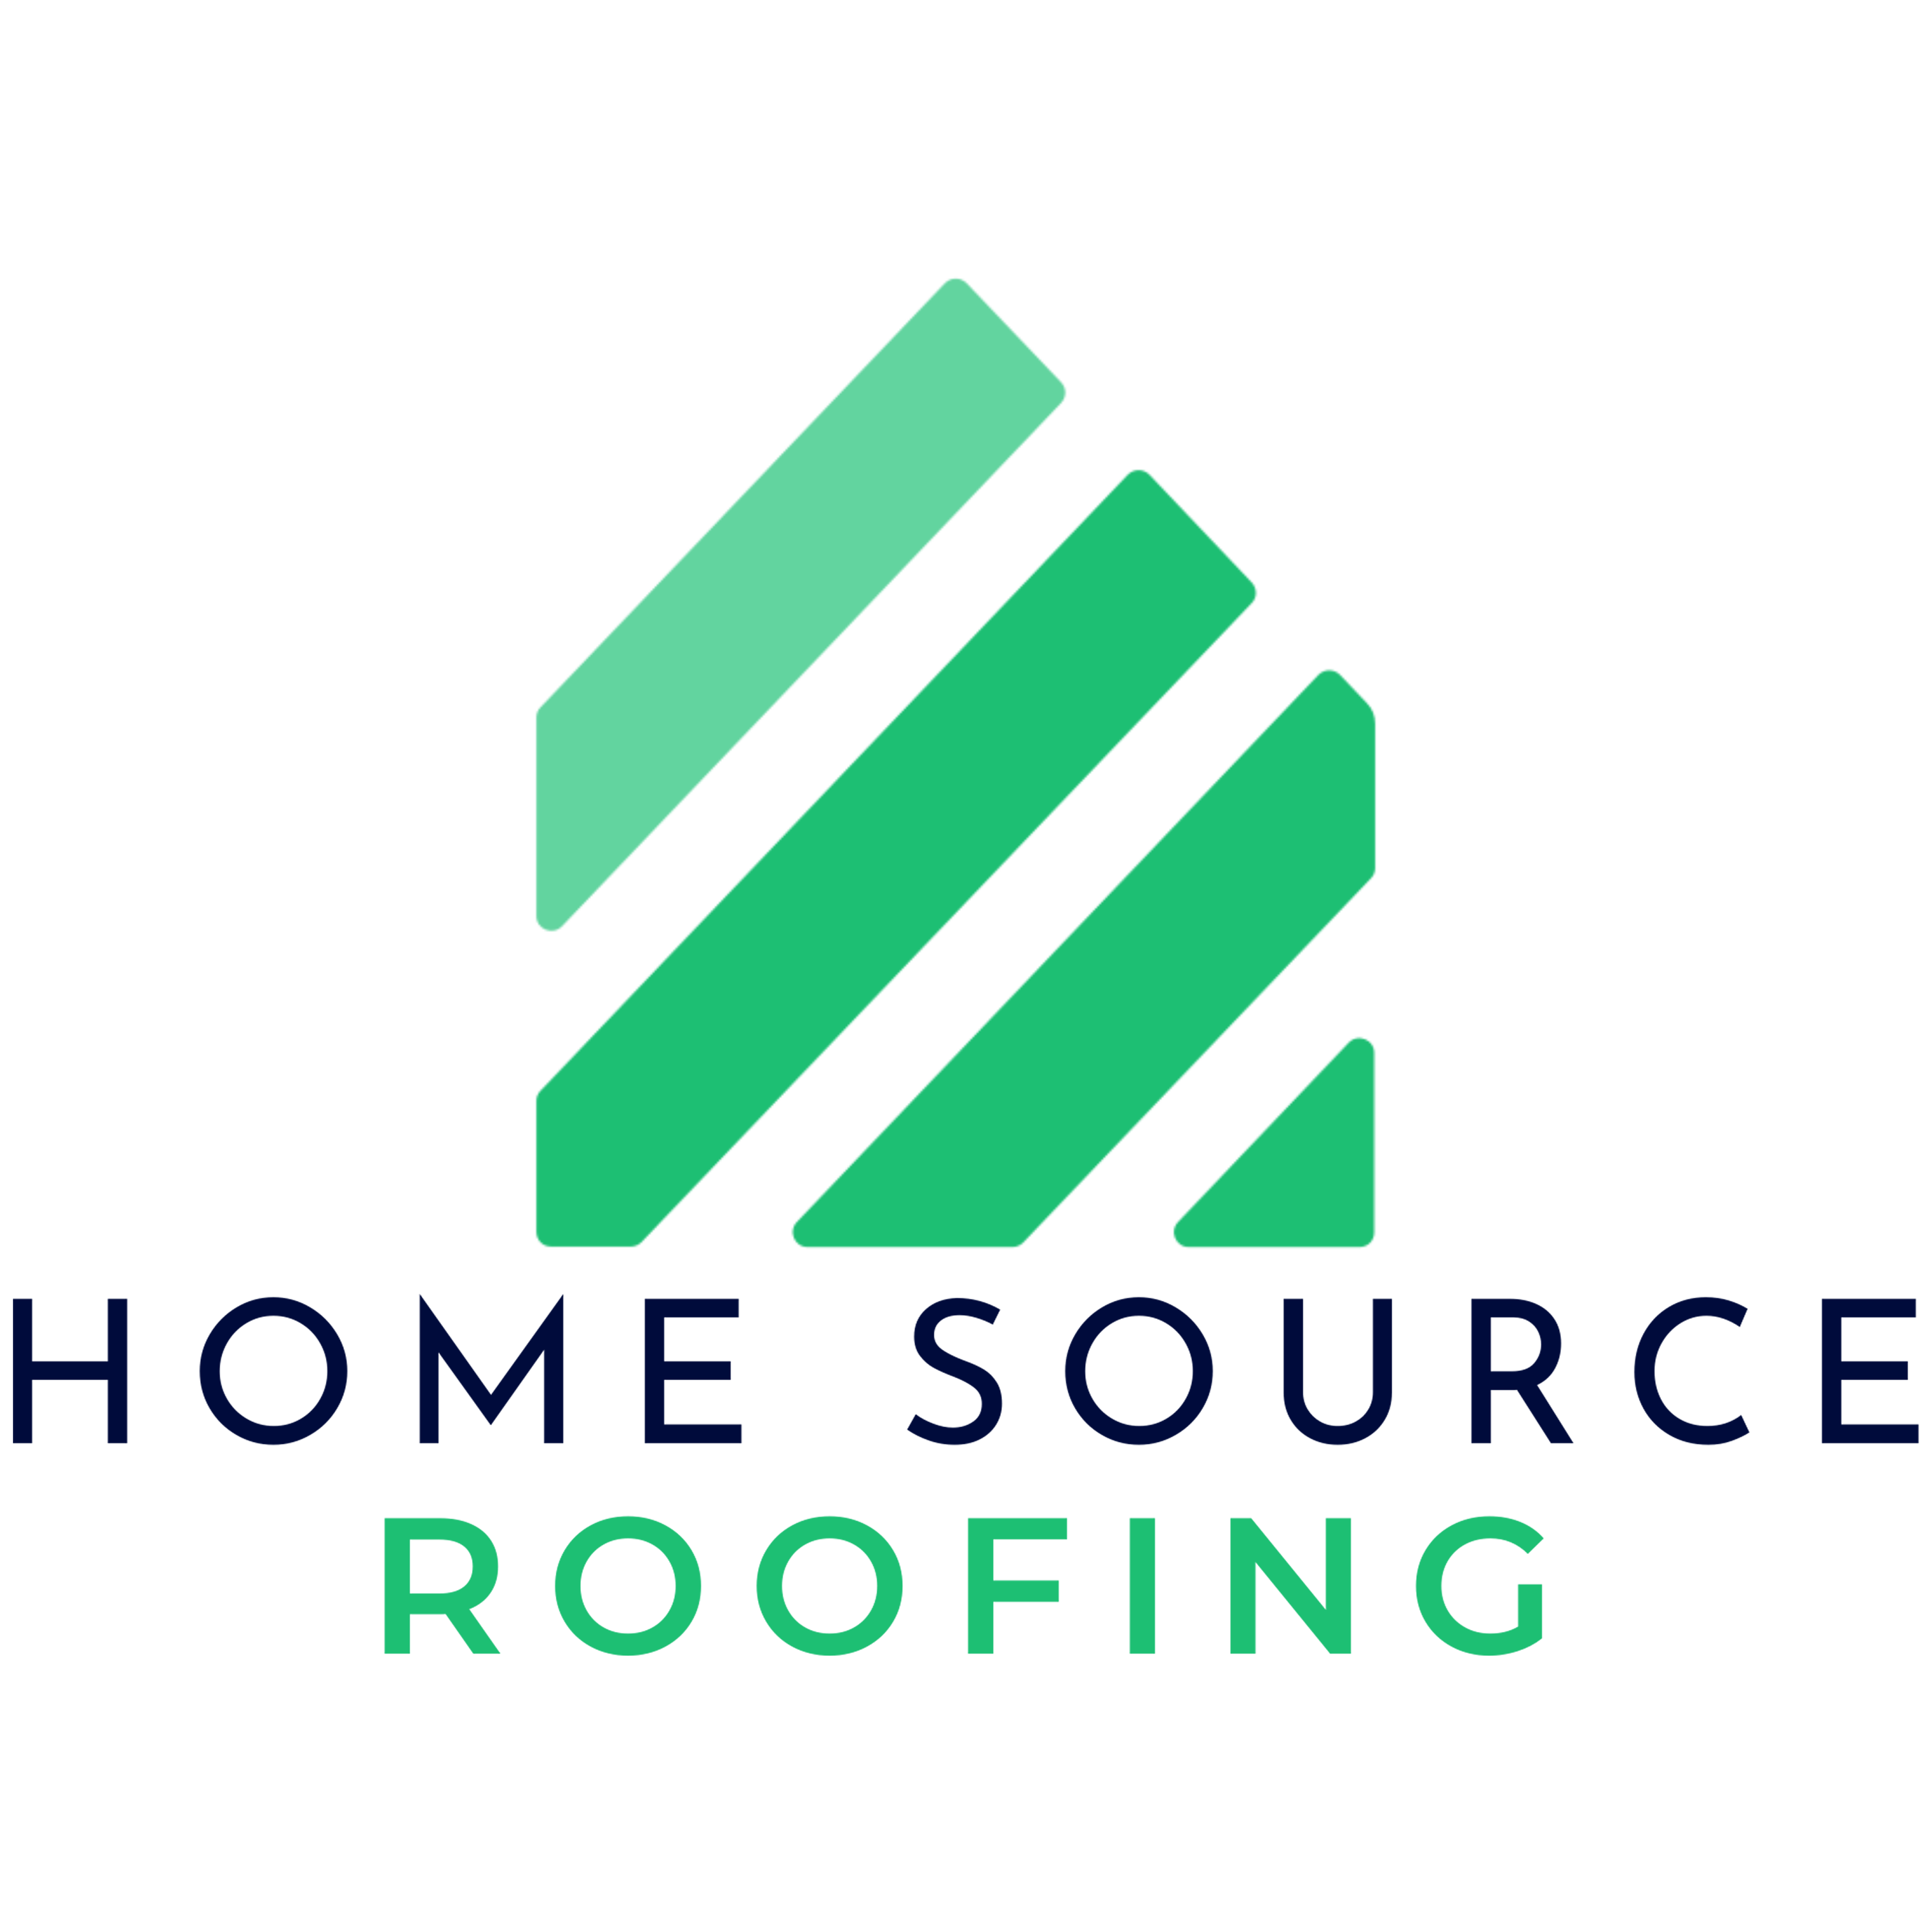 Home Source Roofing: Hagerstown Roofers